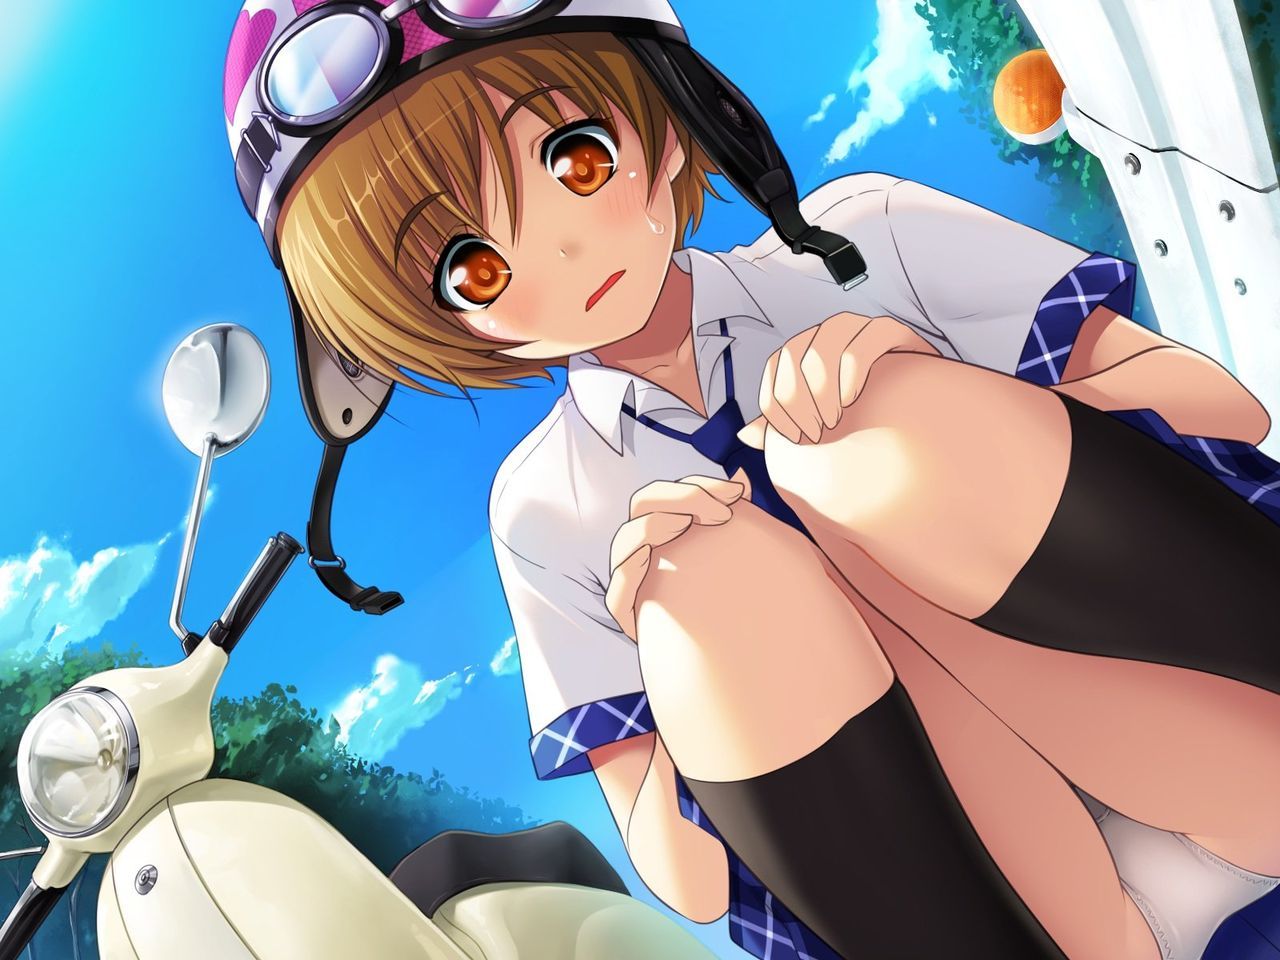 【Erotic Anime Summary】 Students have many opportunities to see and envy Panchira Erotic Images [Secondary Erotic] 24